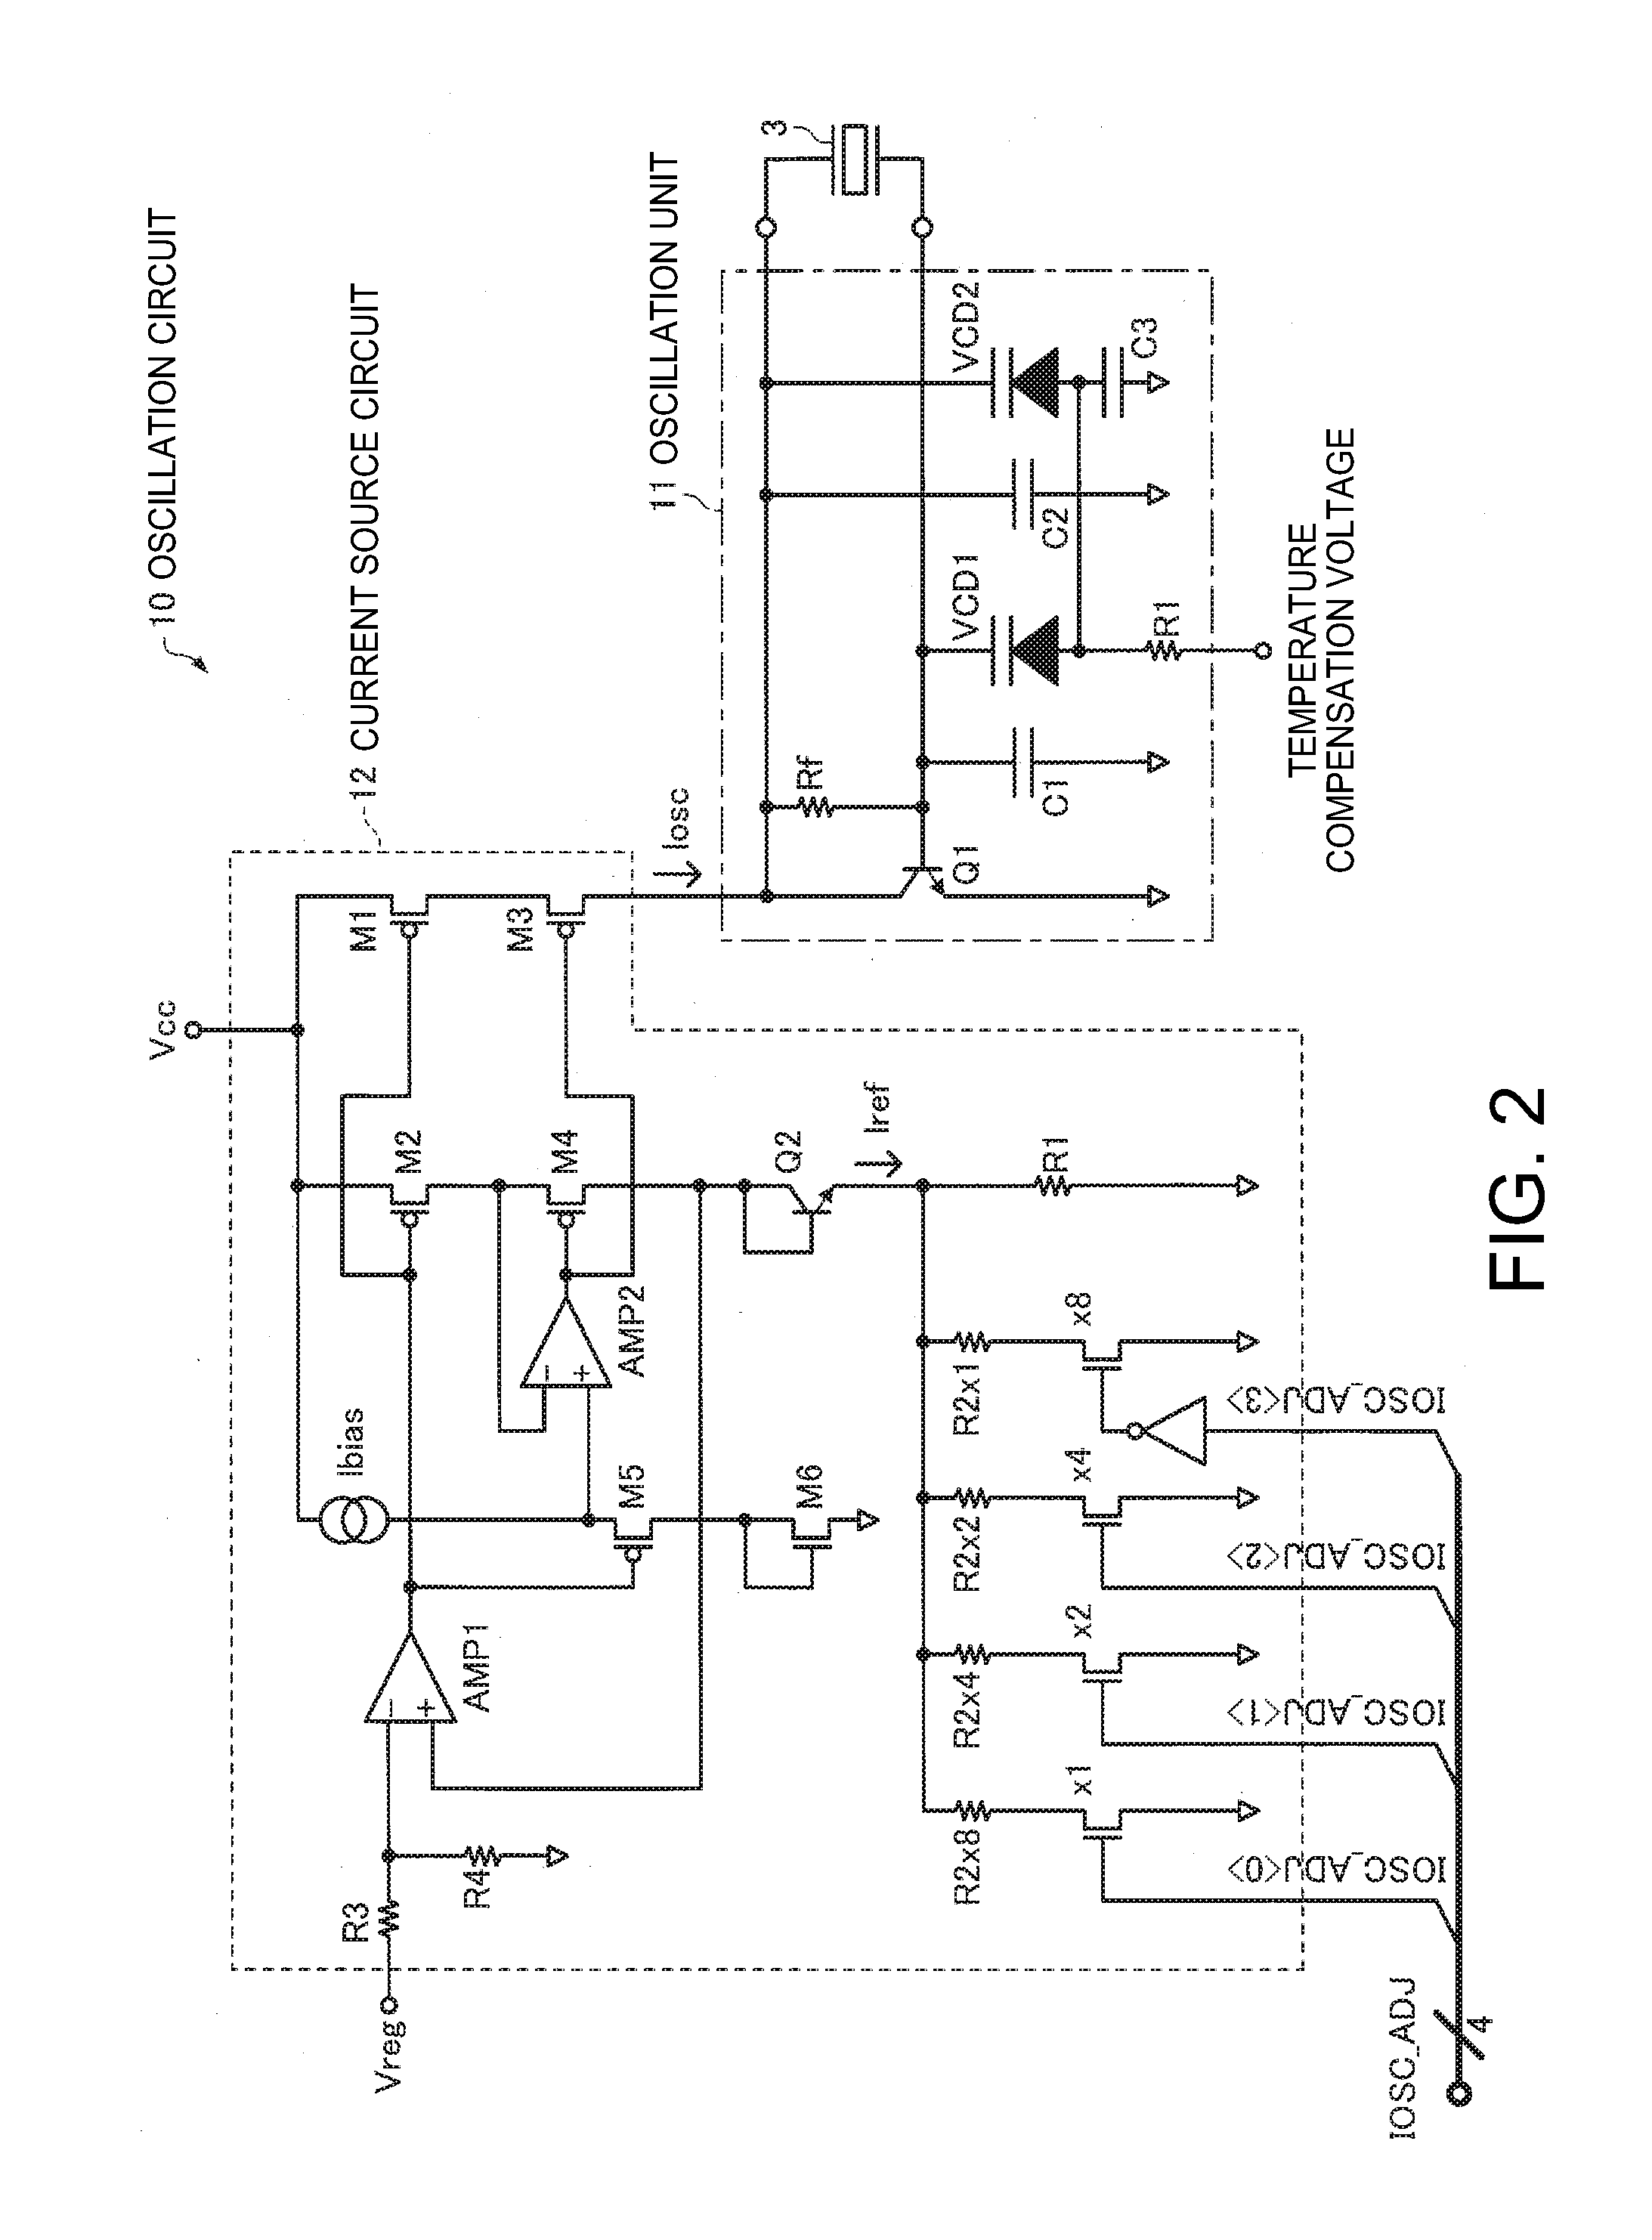 Semiconductor circuit device, oscillator, electronic apparatus, and moving object